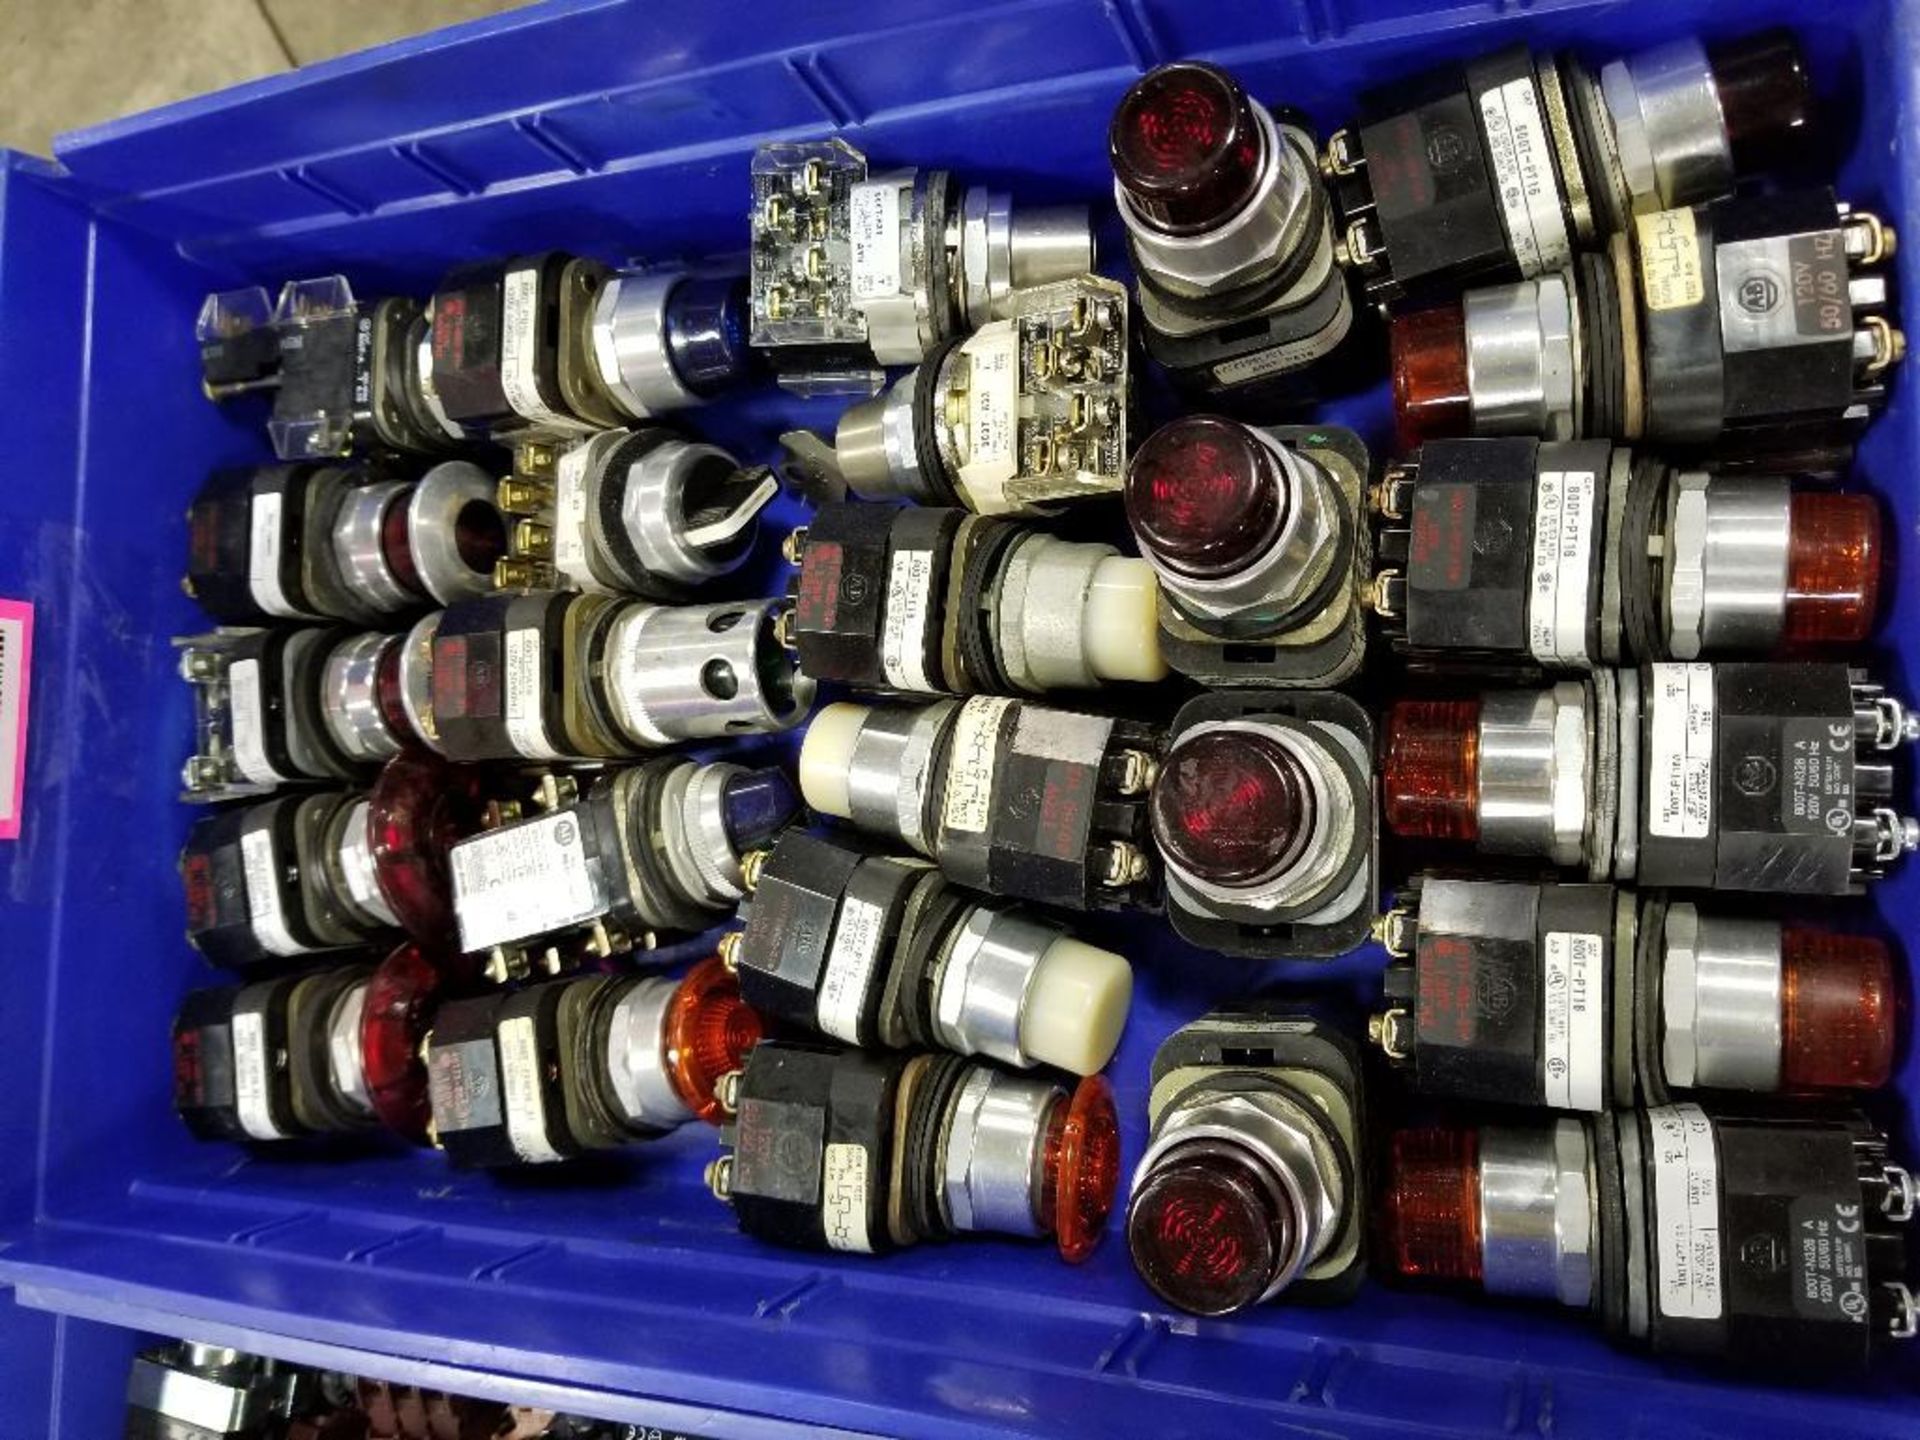 Large assortment of switches and pilot lights.